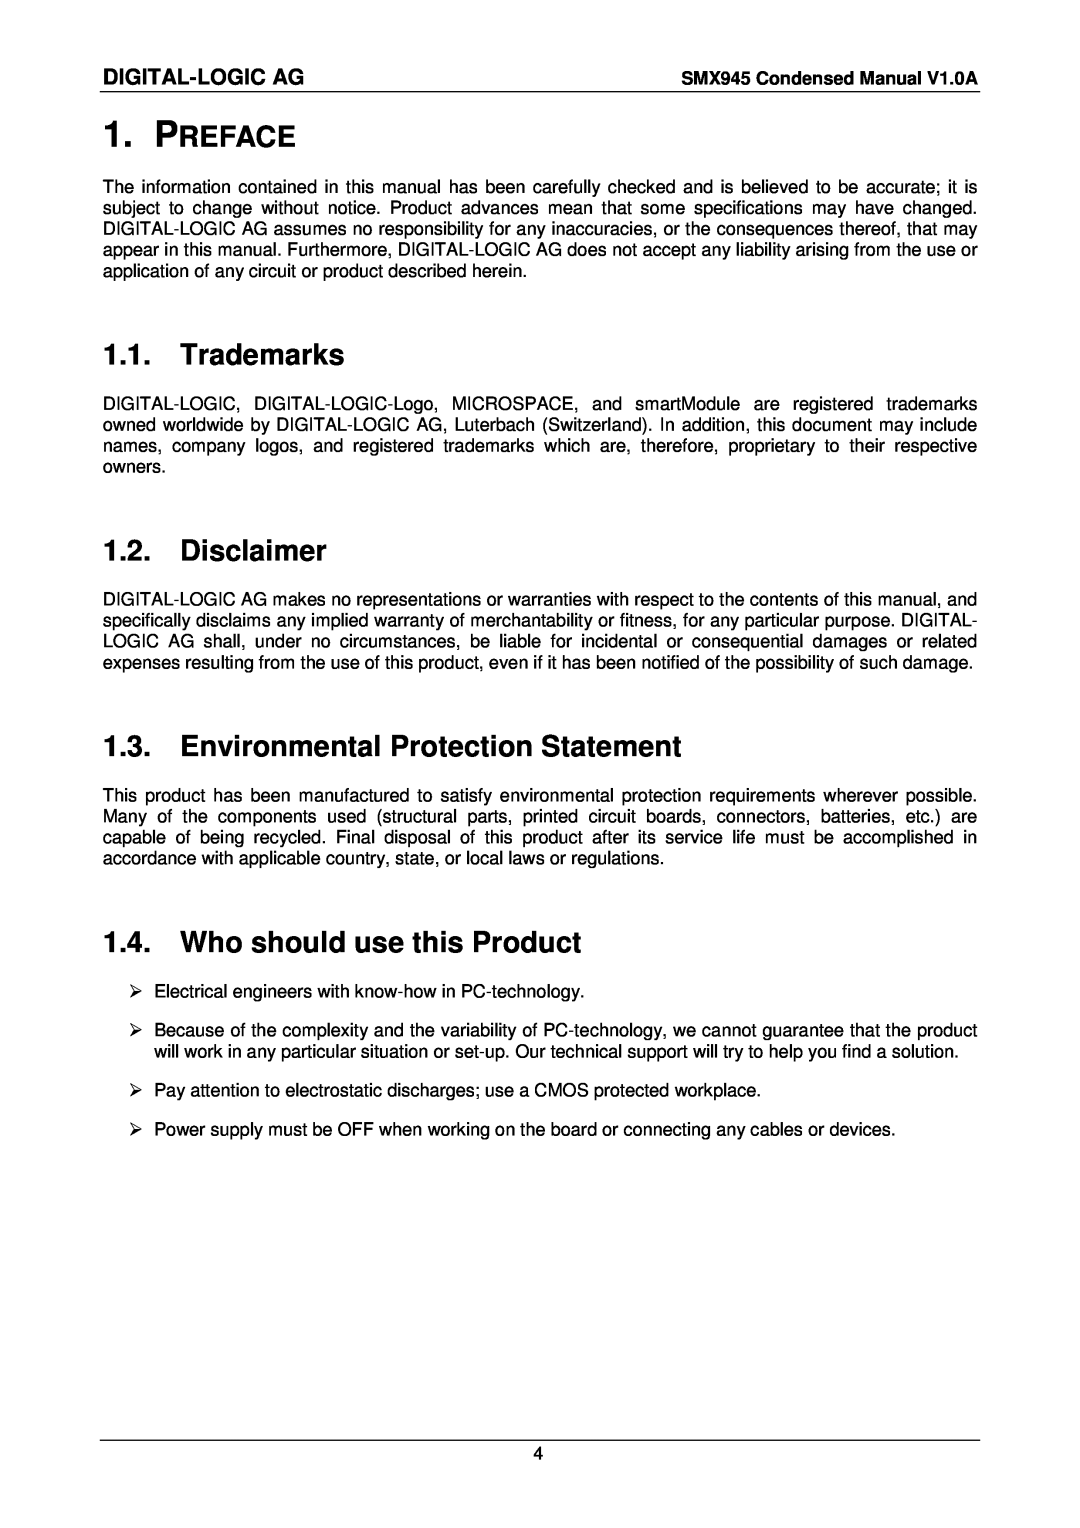 Compaq SMX945 user manual Preface, Trademarks, Disclaimer, Environmental Protection Statement, Who should use this Product 